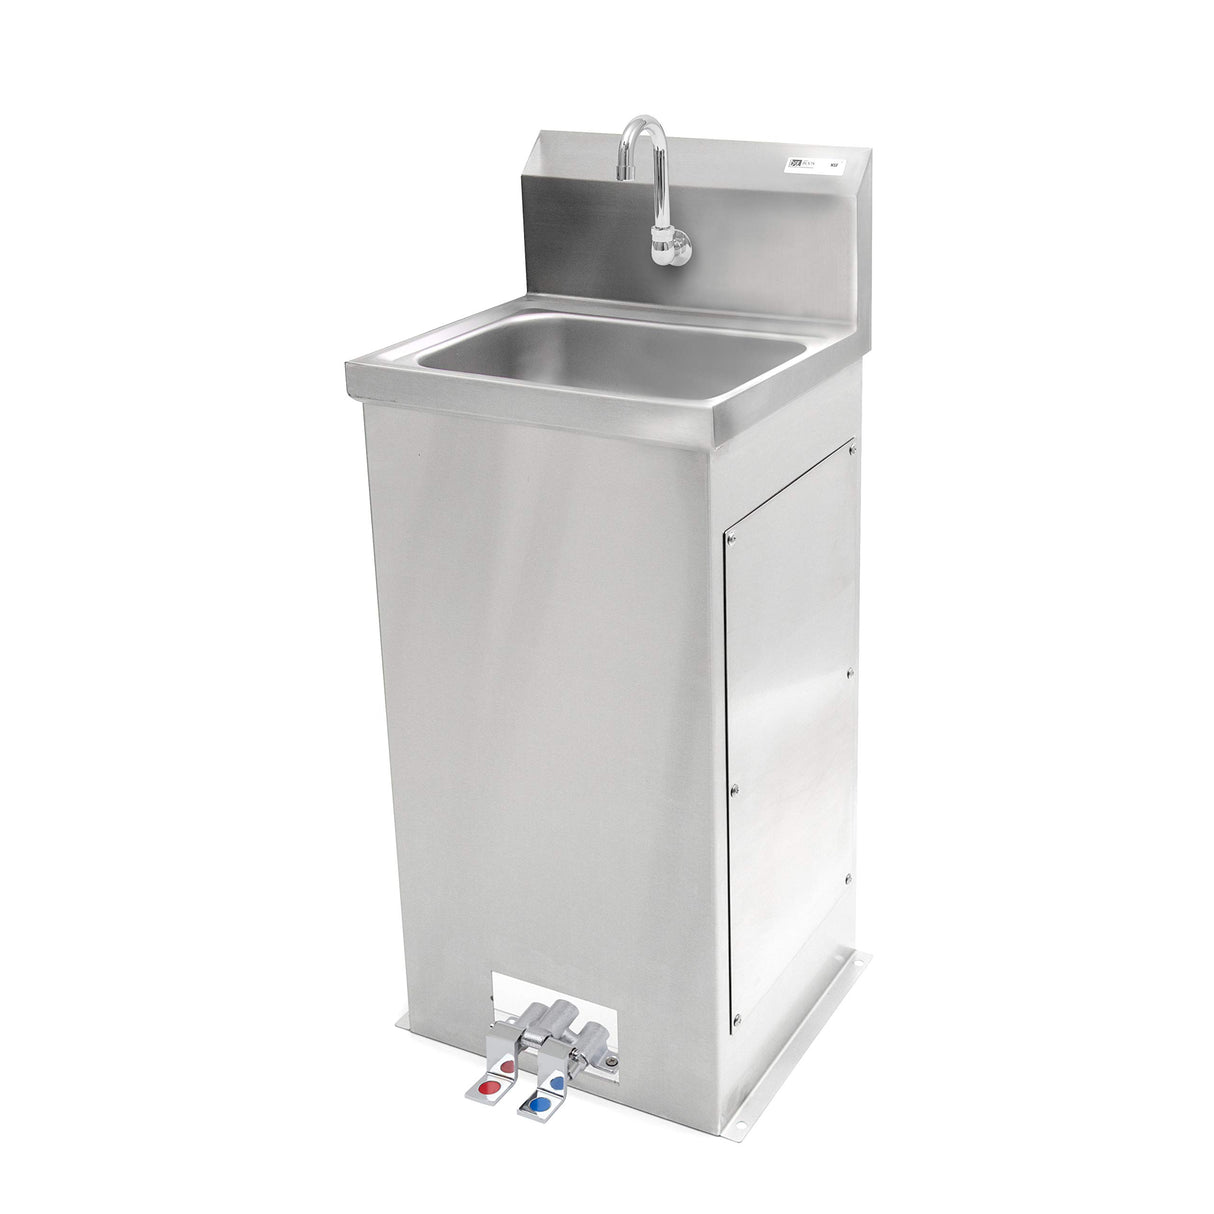 John Boos PBHS-F-1410 Hands-Free Pedestal Hand Washing Sink, 14" Wide x 10" Front to Back 5" Deep Bowl, 1 Centered Splash Mount Faucet Hole, Goose Neck Spout and Foot Valves Included